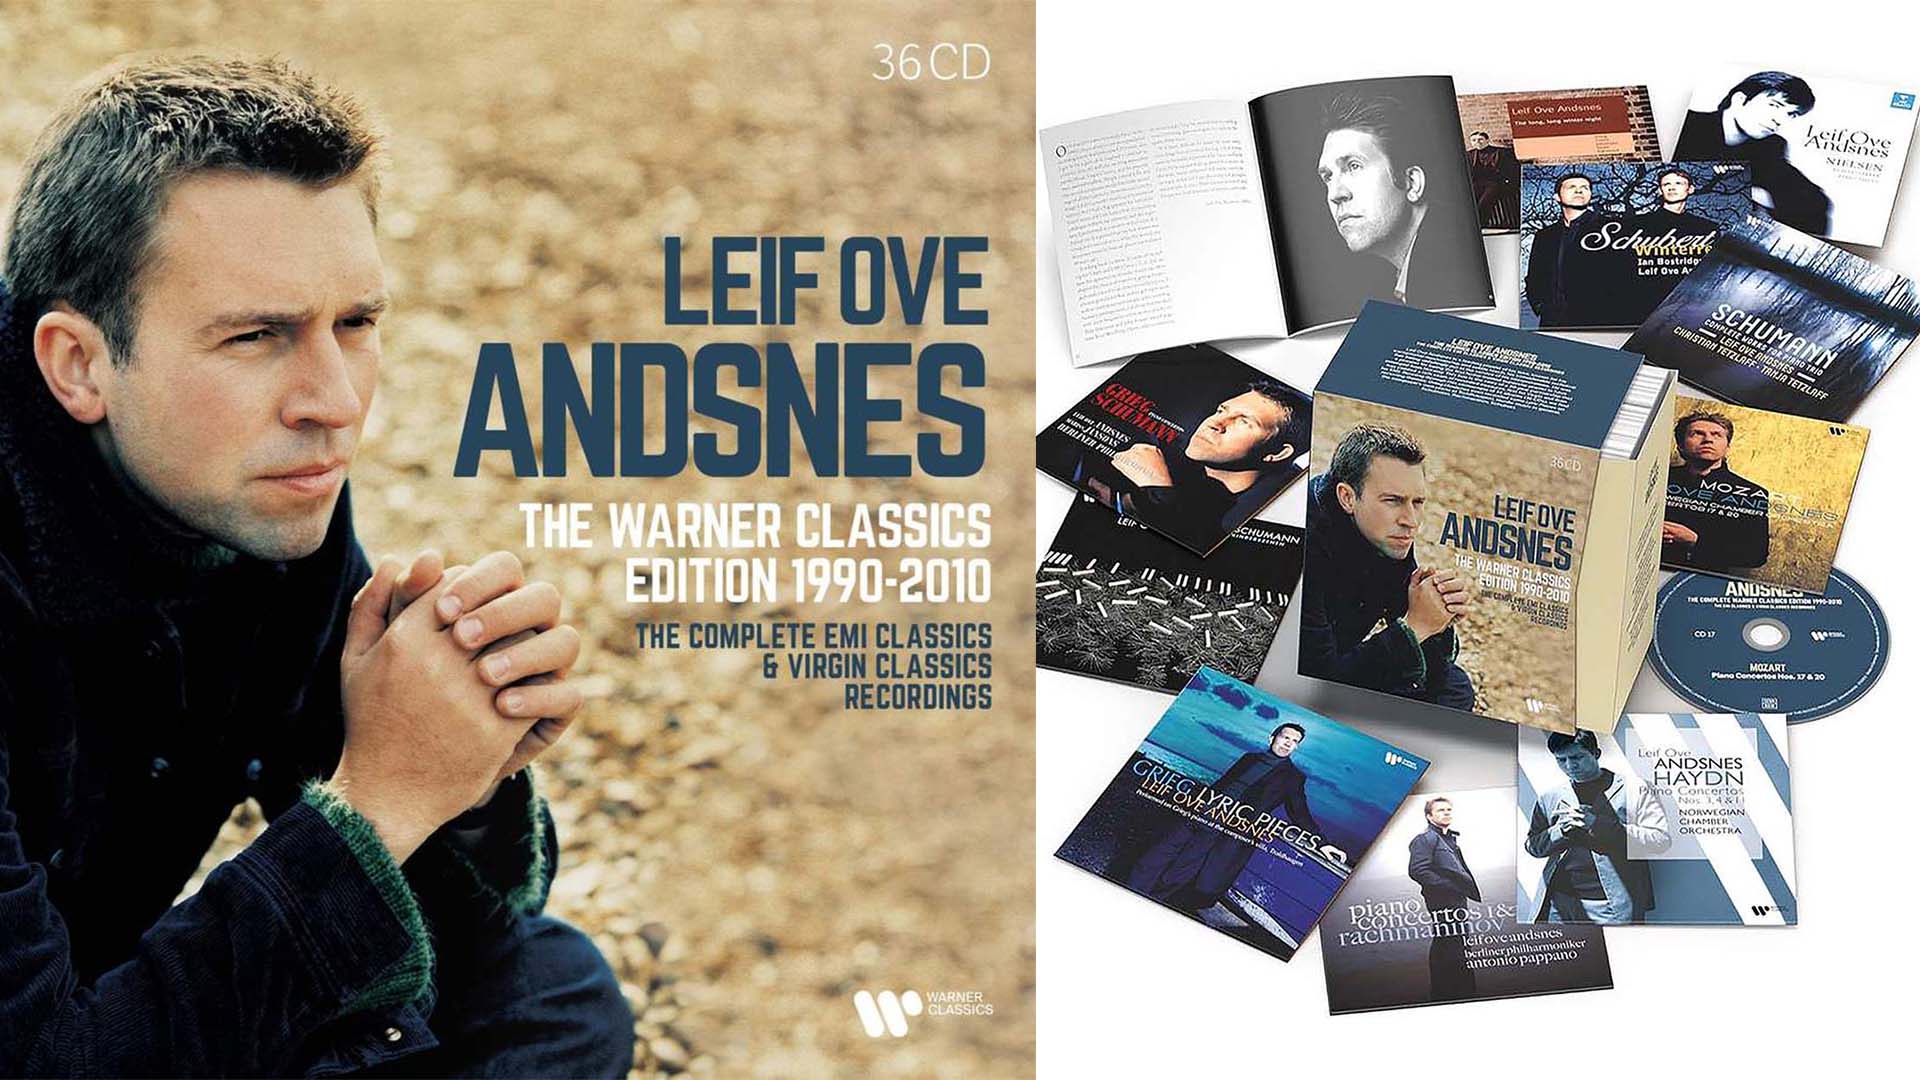 The cover art and collage of CDs for Leif Ove Andsnes: The Warner Classics Edition (1990 - 2010) 36-CD box set.